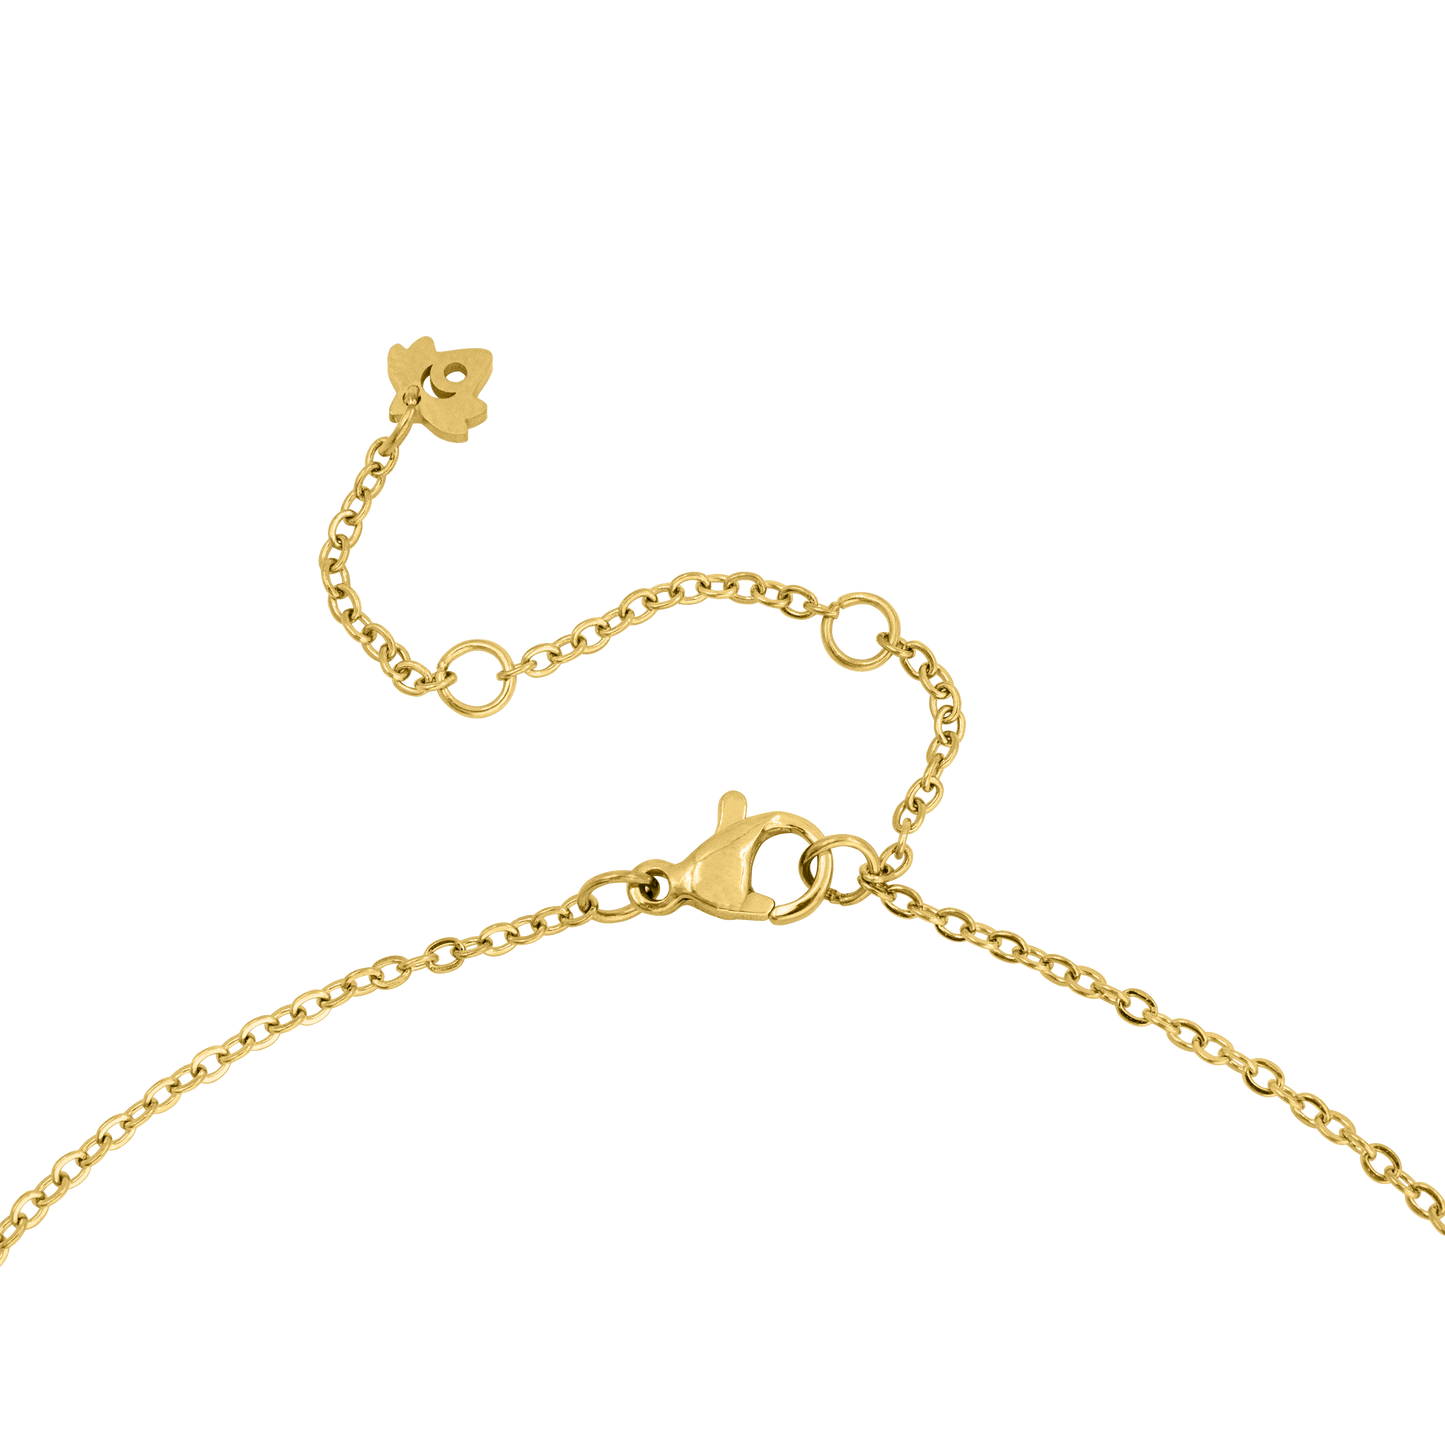 Beach Nights Necklace Gold